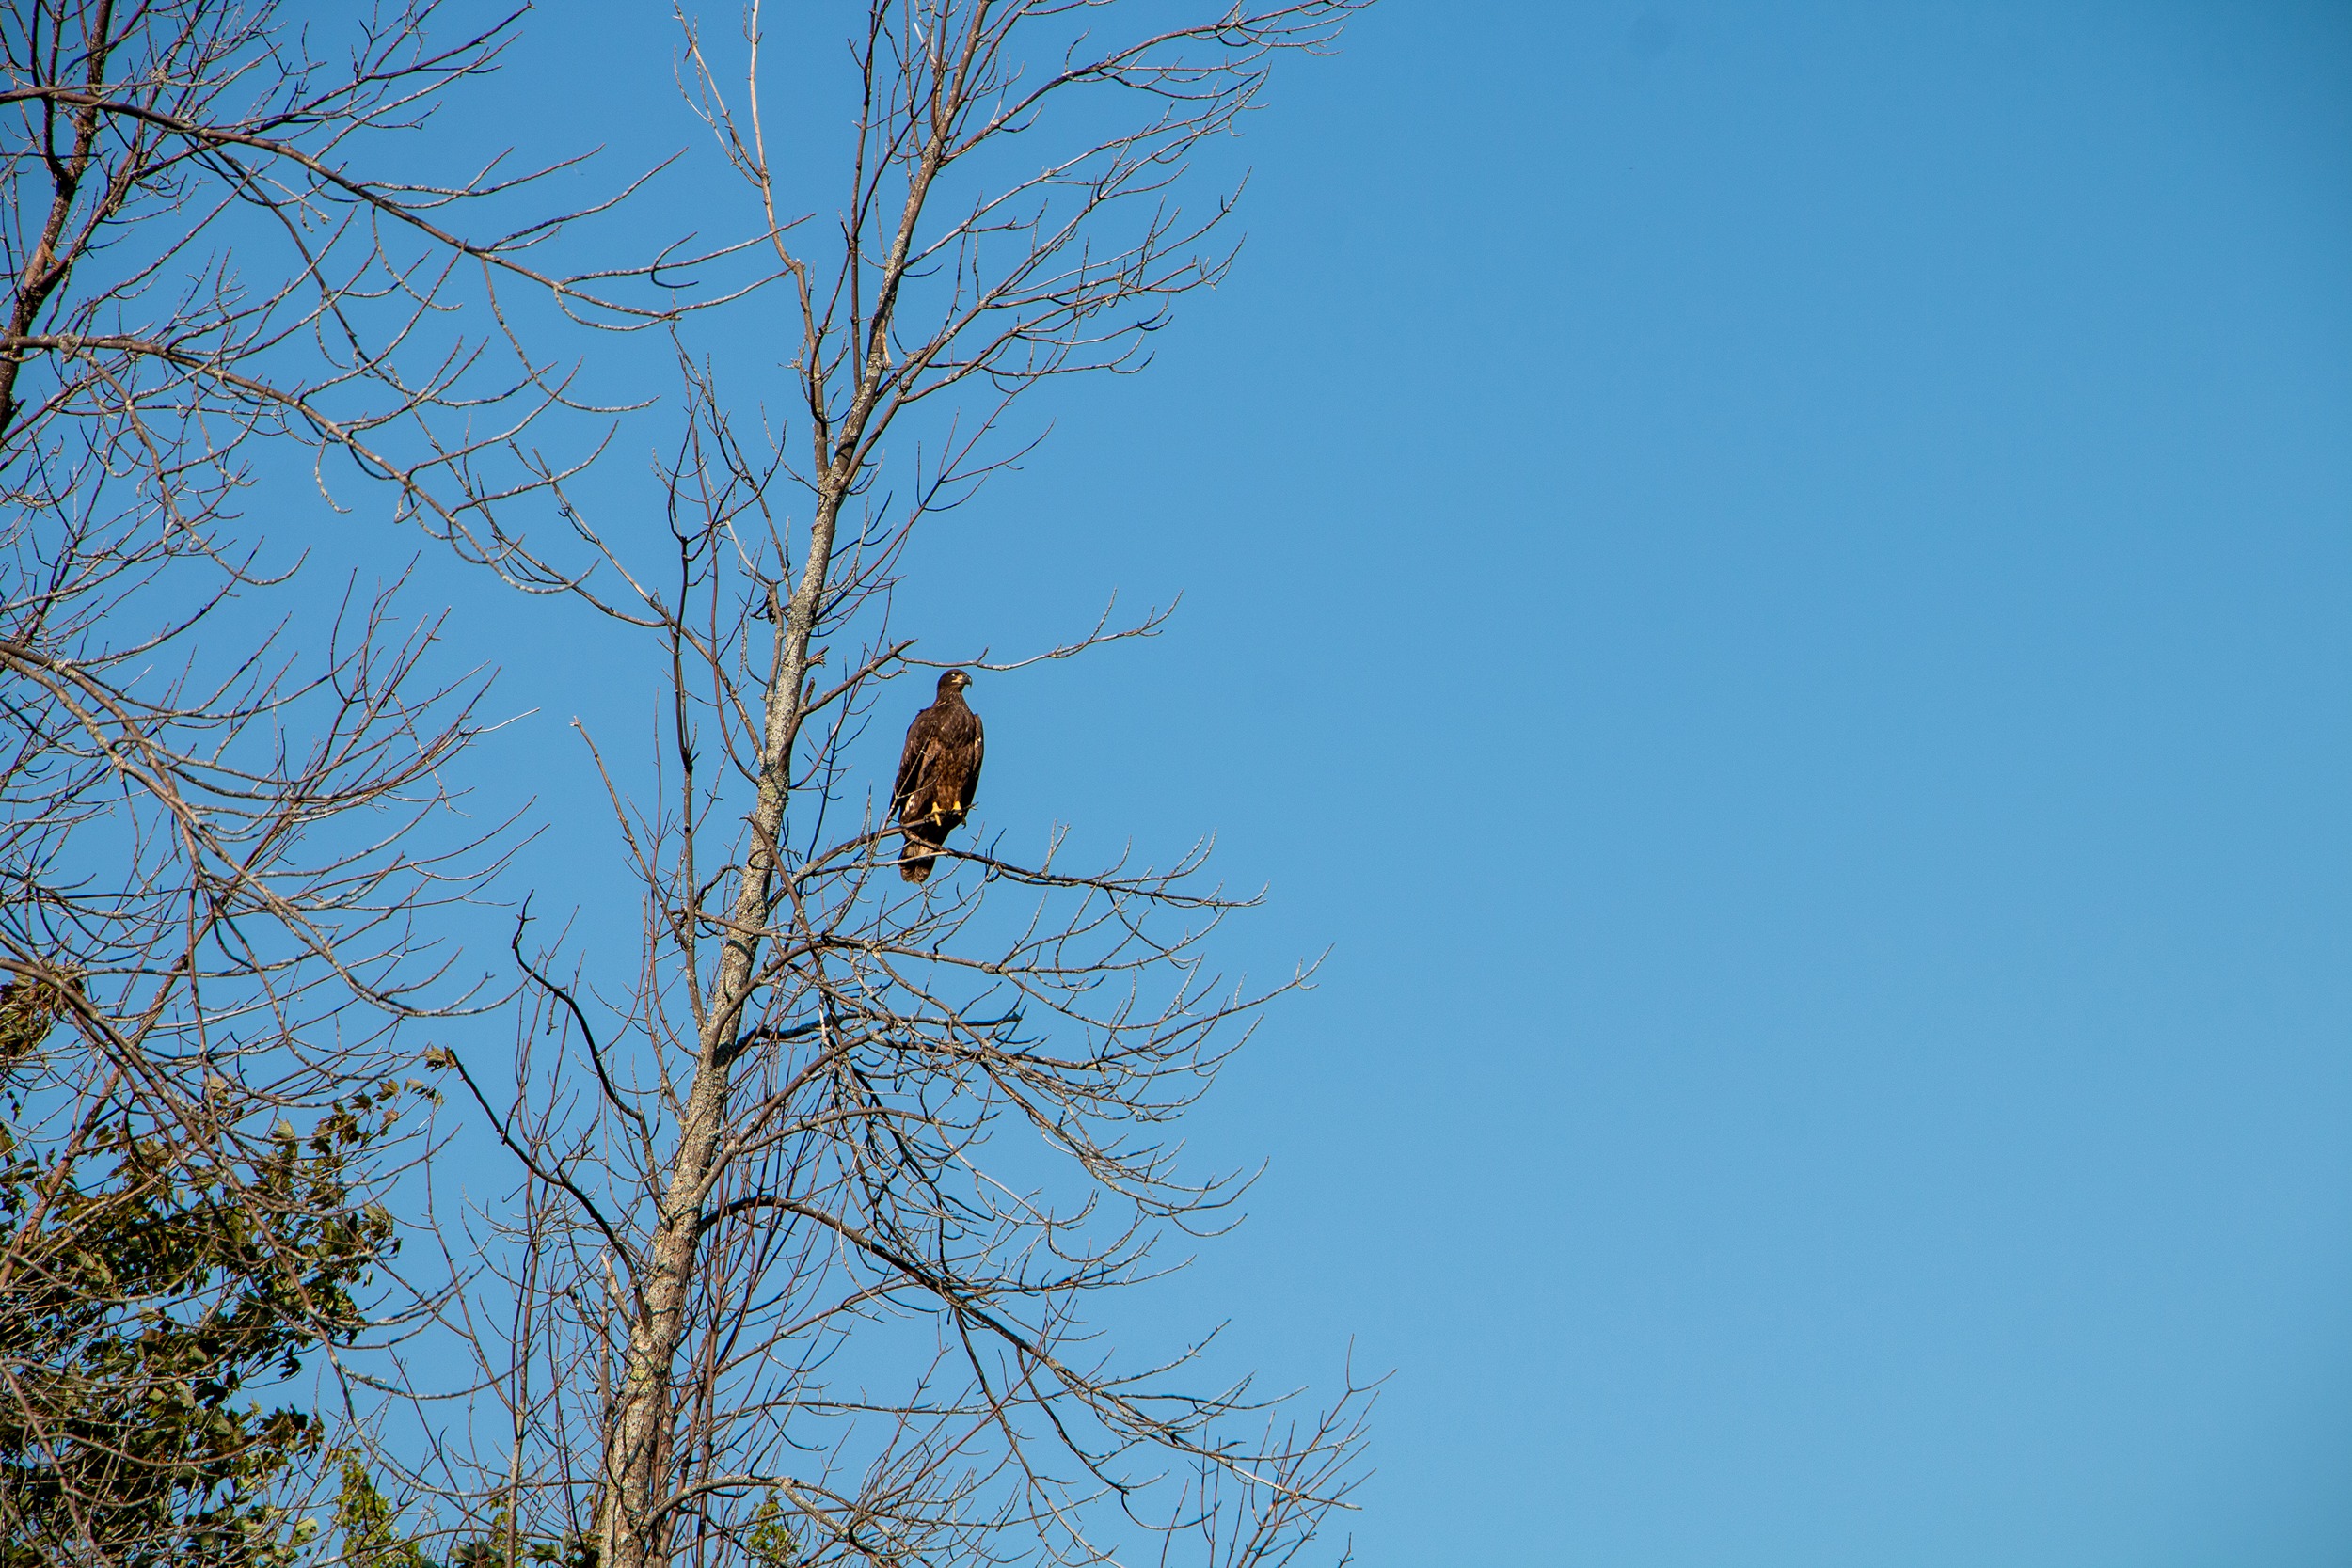 A large brown eagle perching on a tree against a blue sky